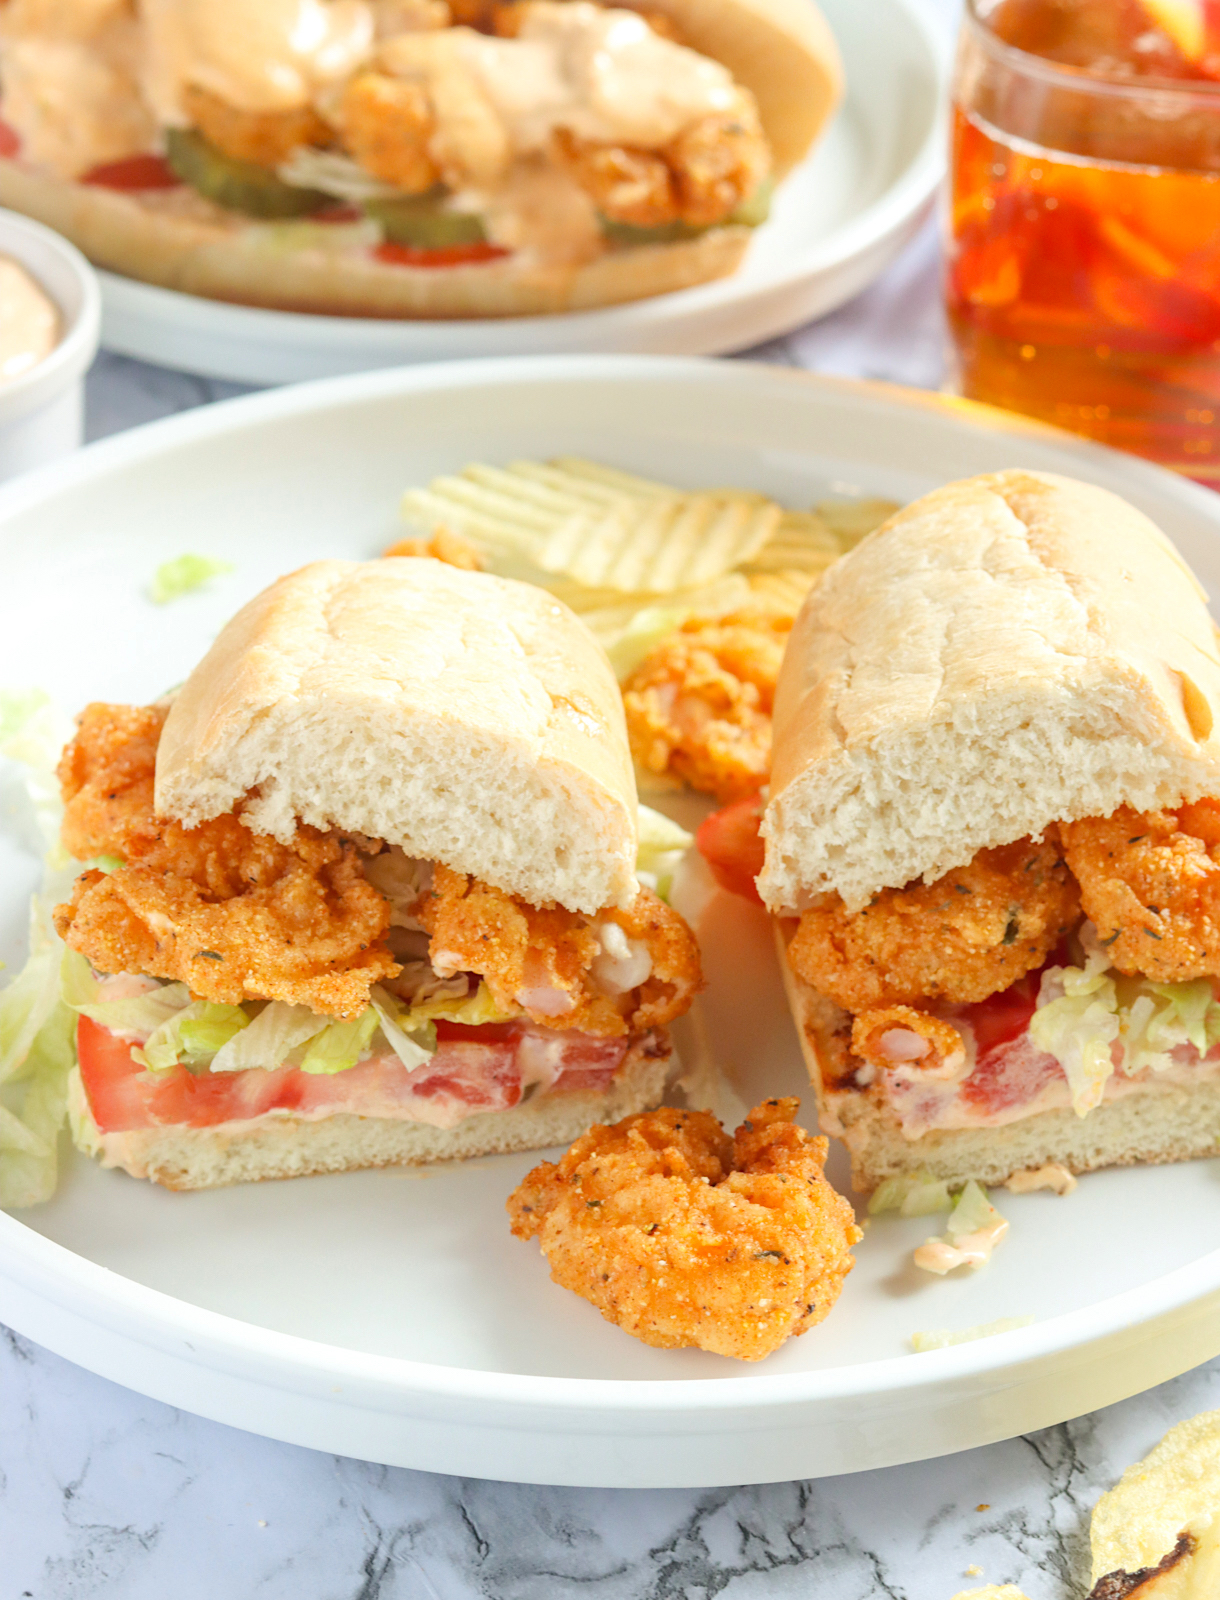 An insider's view of a mouthwatering po' boy sandwich